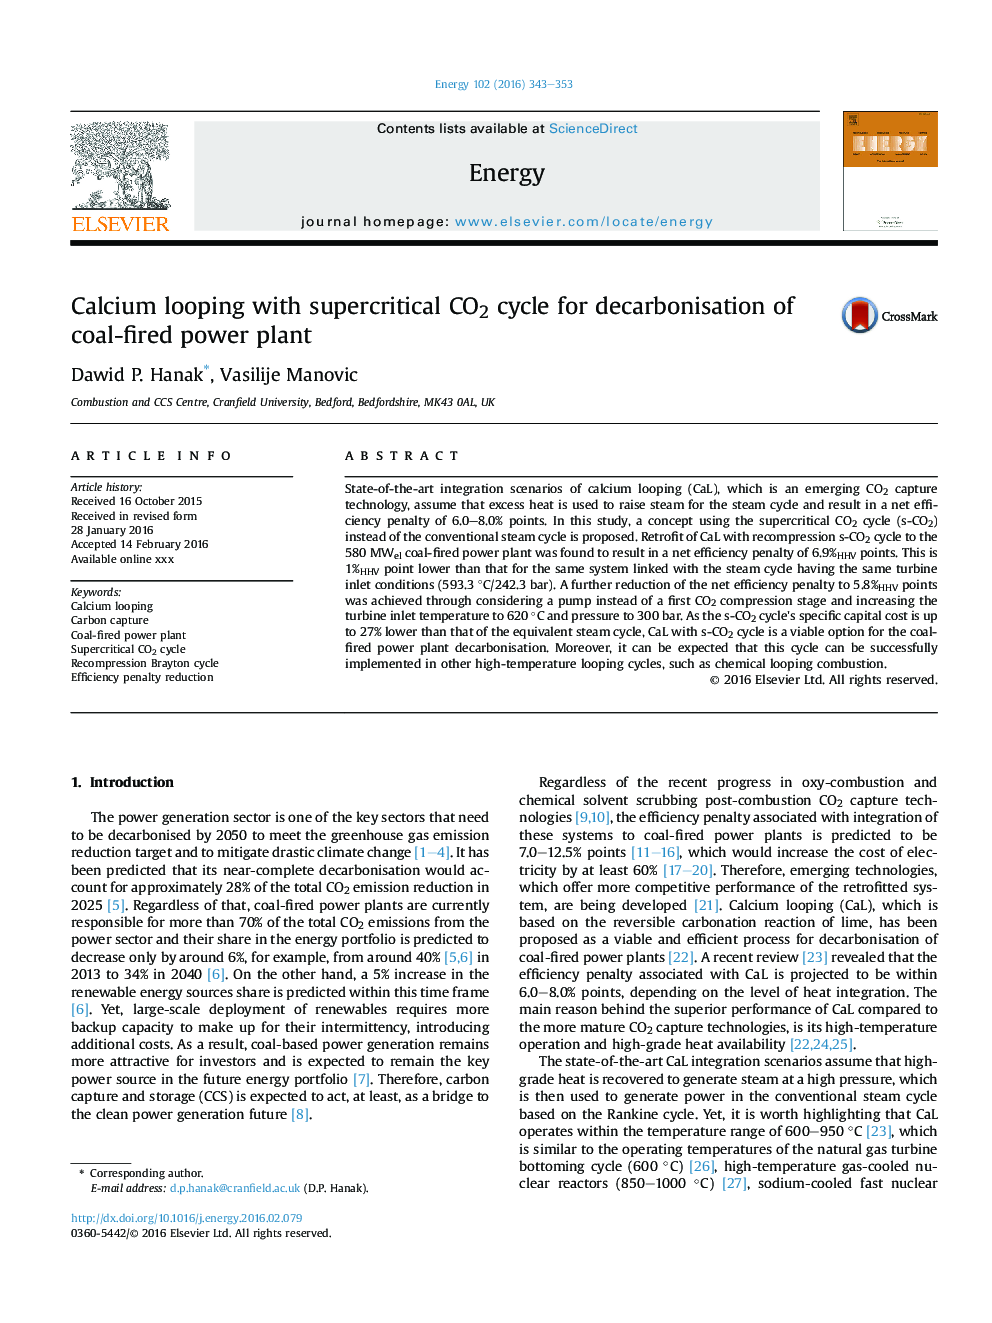 Calcium looping with supercritical CO2 cycle for decarbonisation of coal-fired power plant